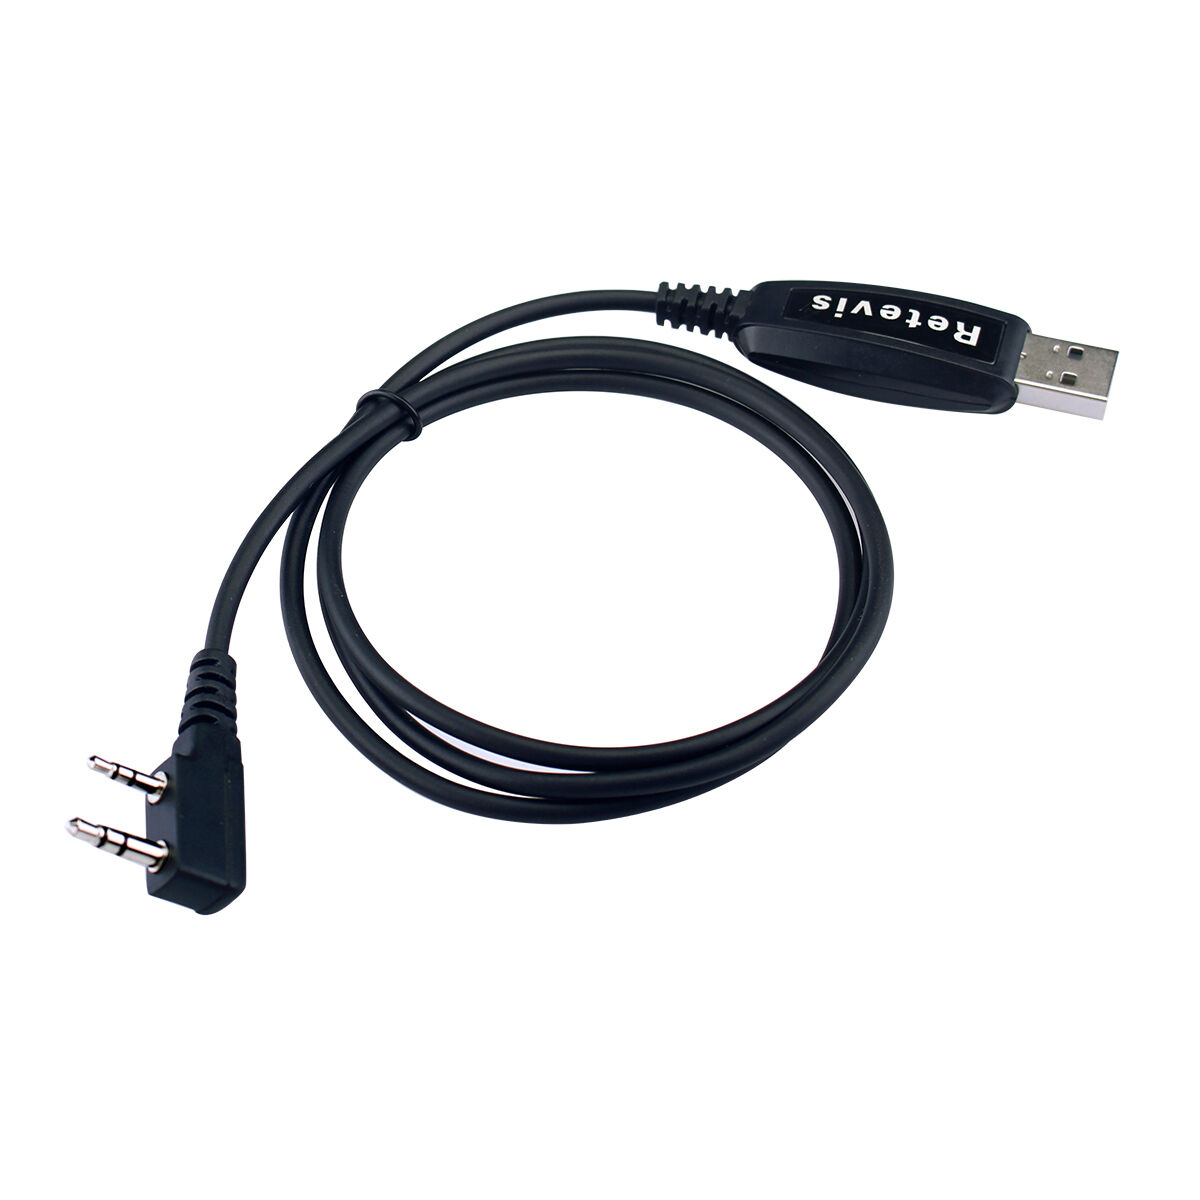 USB Programming Cable for TYT MD-380/390